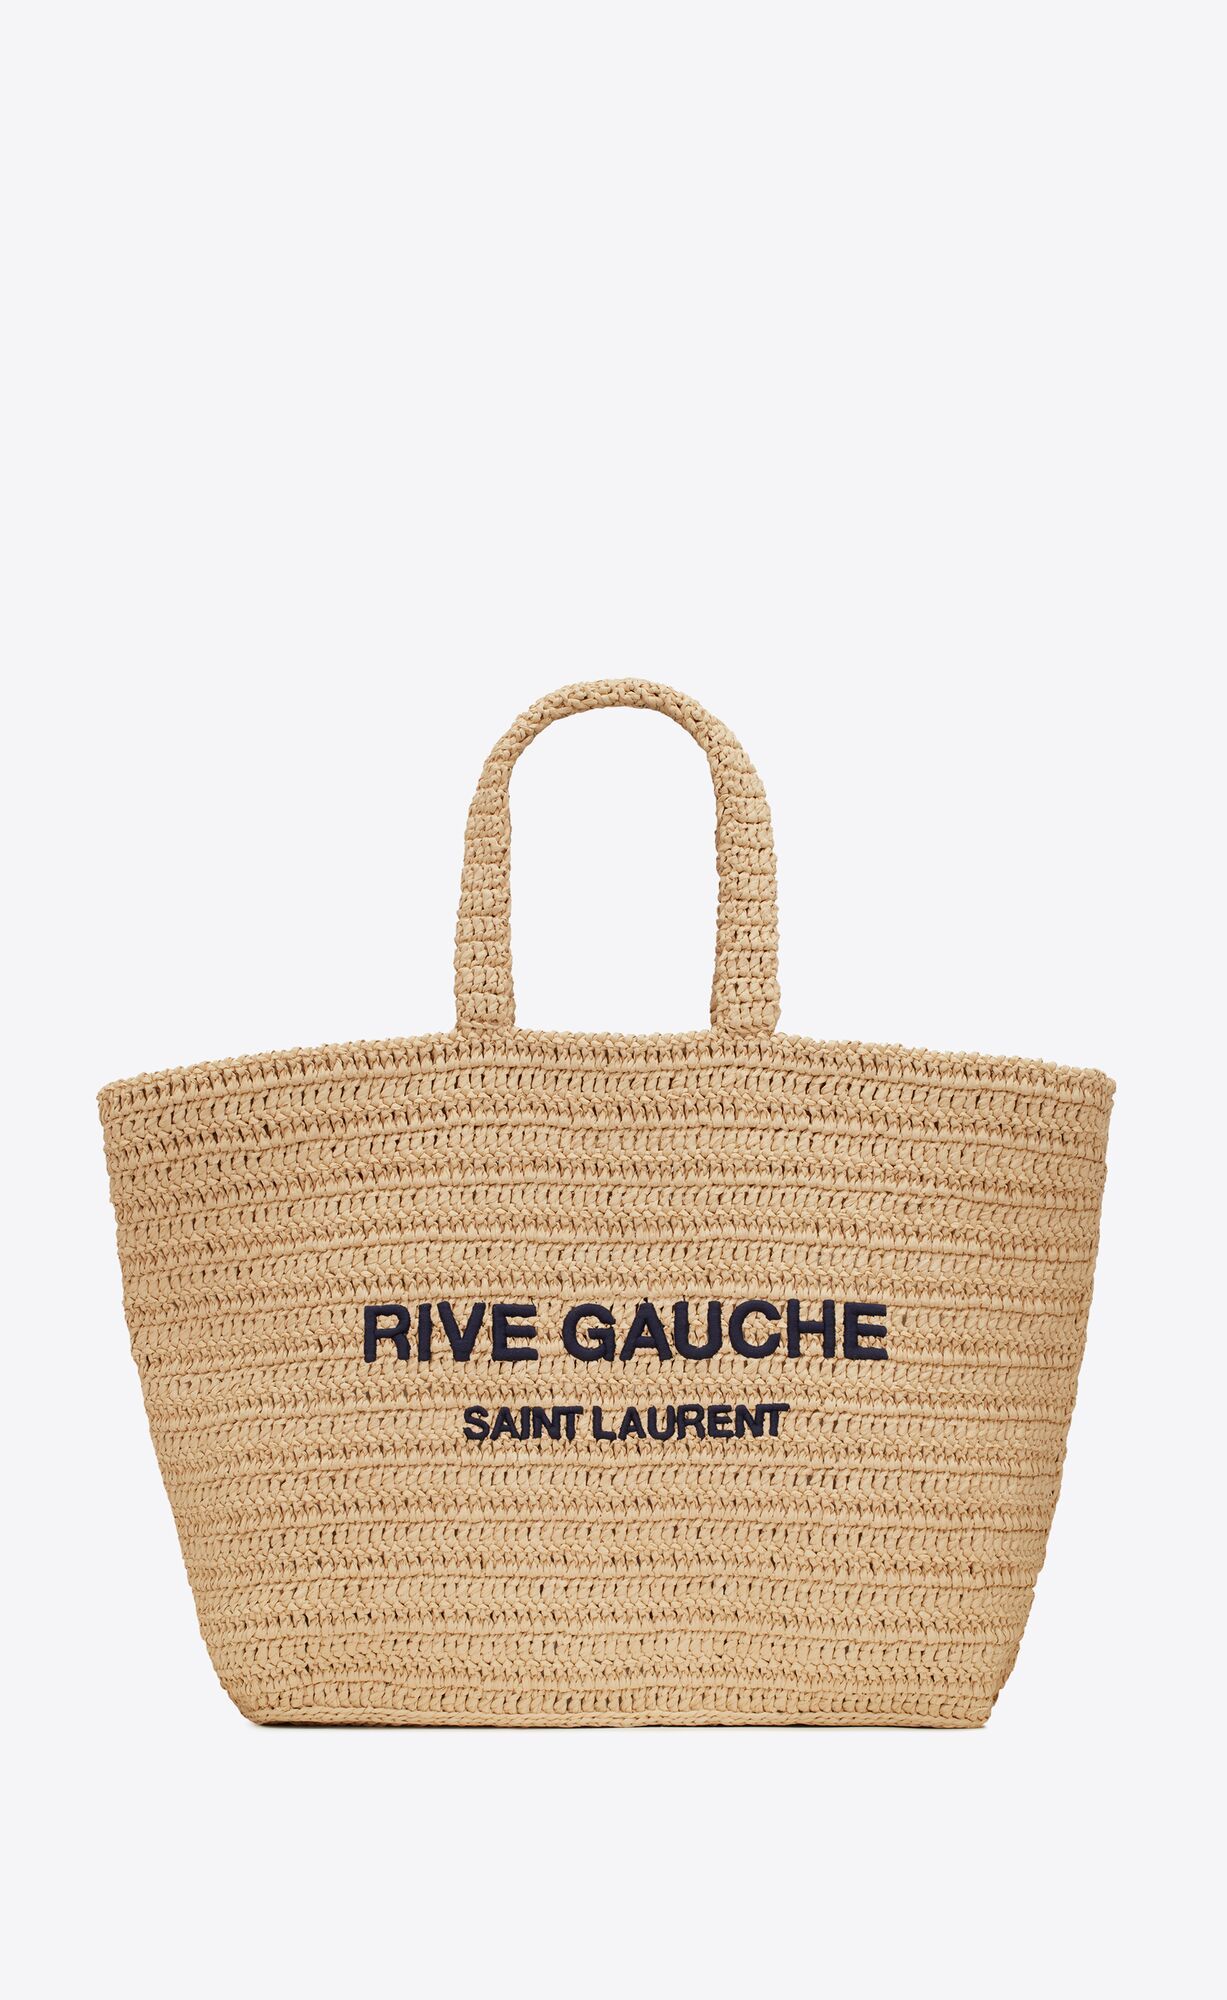 Crocheted RAFFIA TOTE BAG, emblazoned with ‘RIVE GAUCHE’.SOFT AND LIGHT WITH LARGE HANDLES, S... | Saint Laurent Inc. (Global)